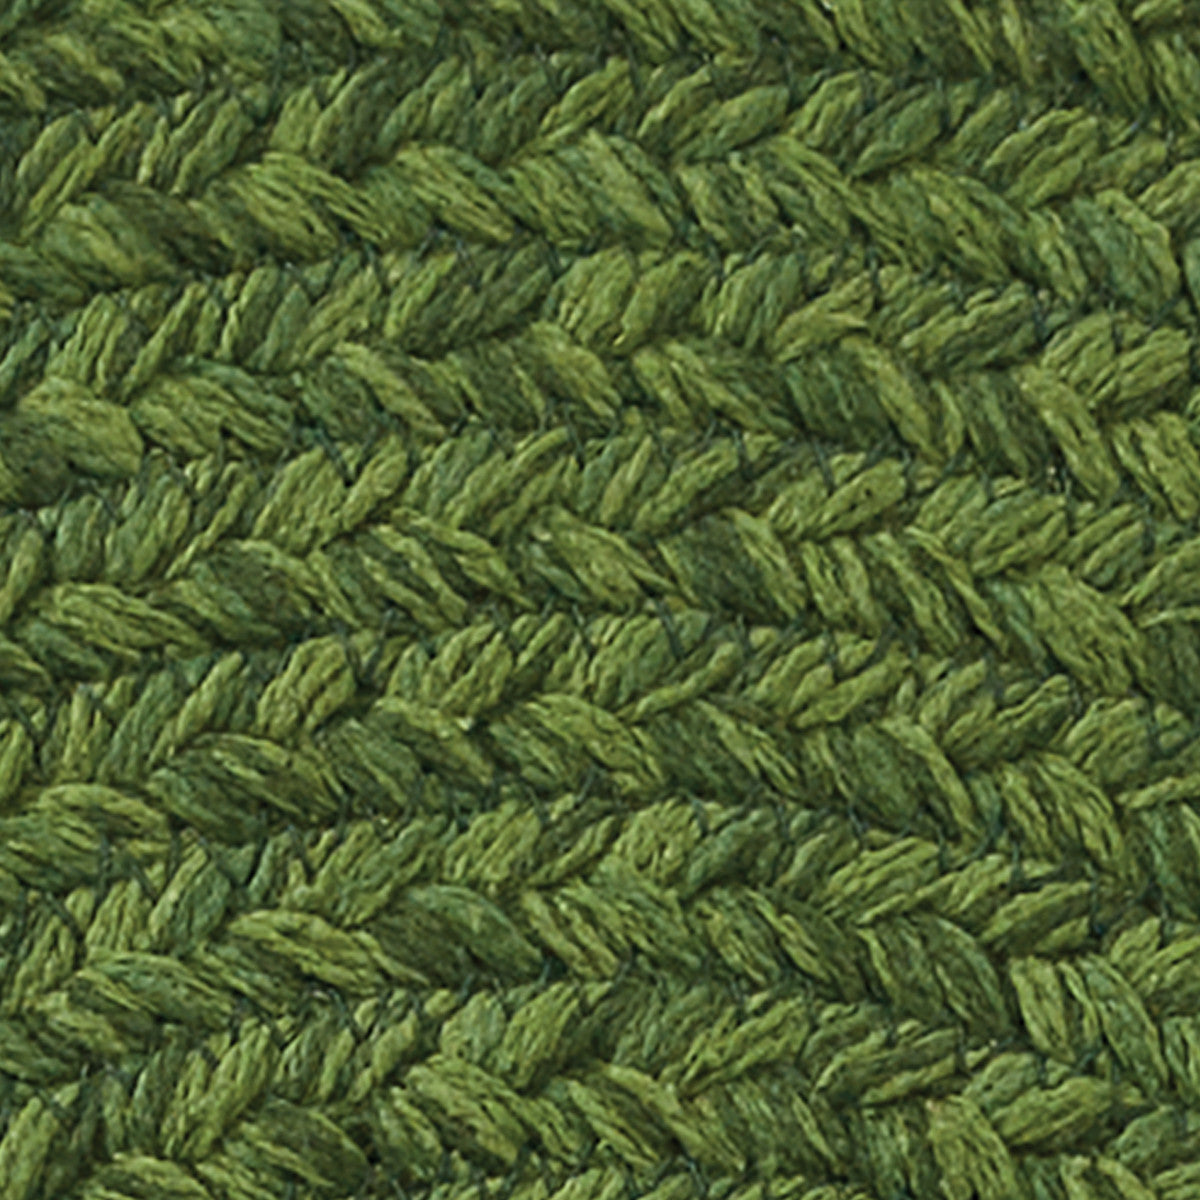 Spice Bin Braided Placemat - Basil Set of 12  Park Designs